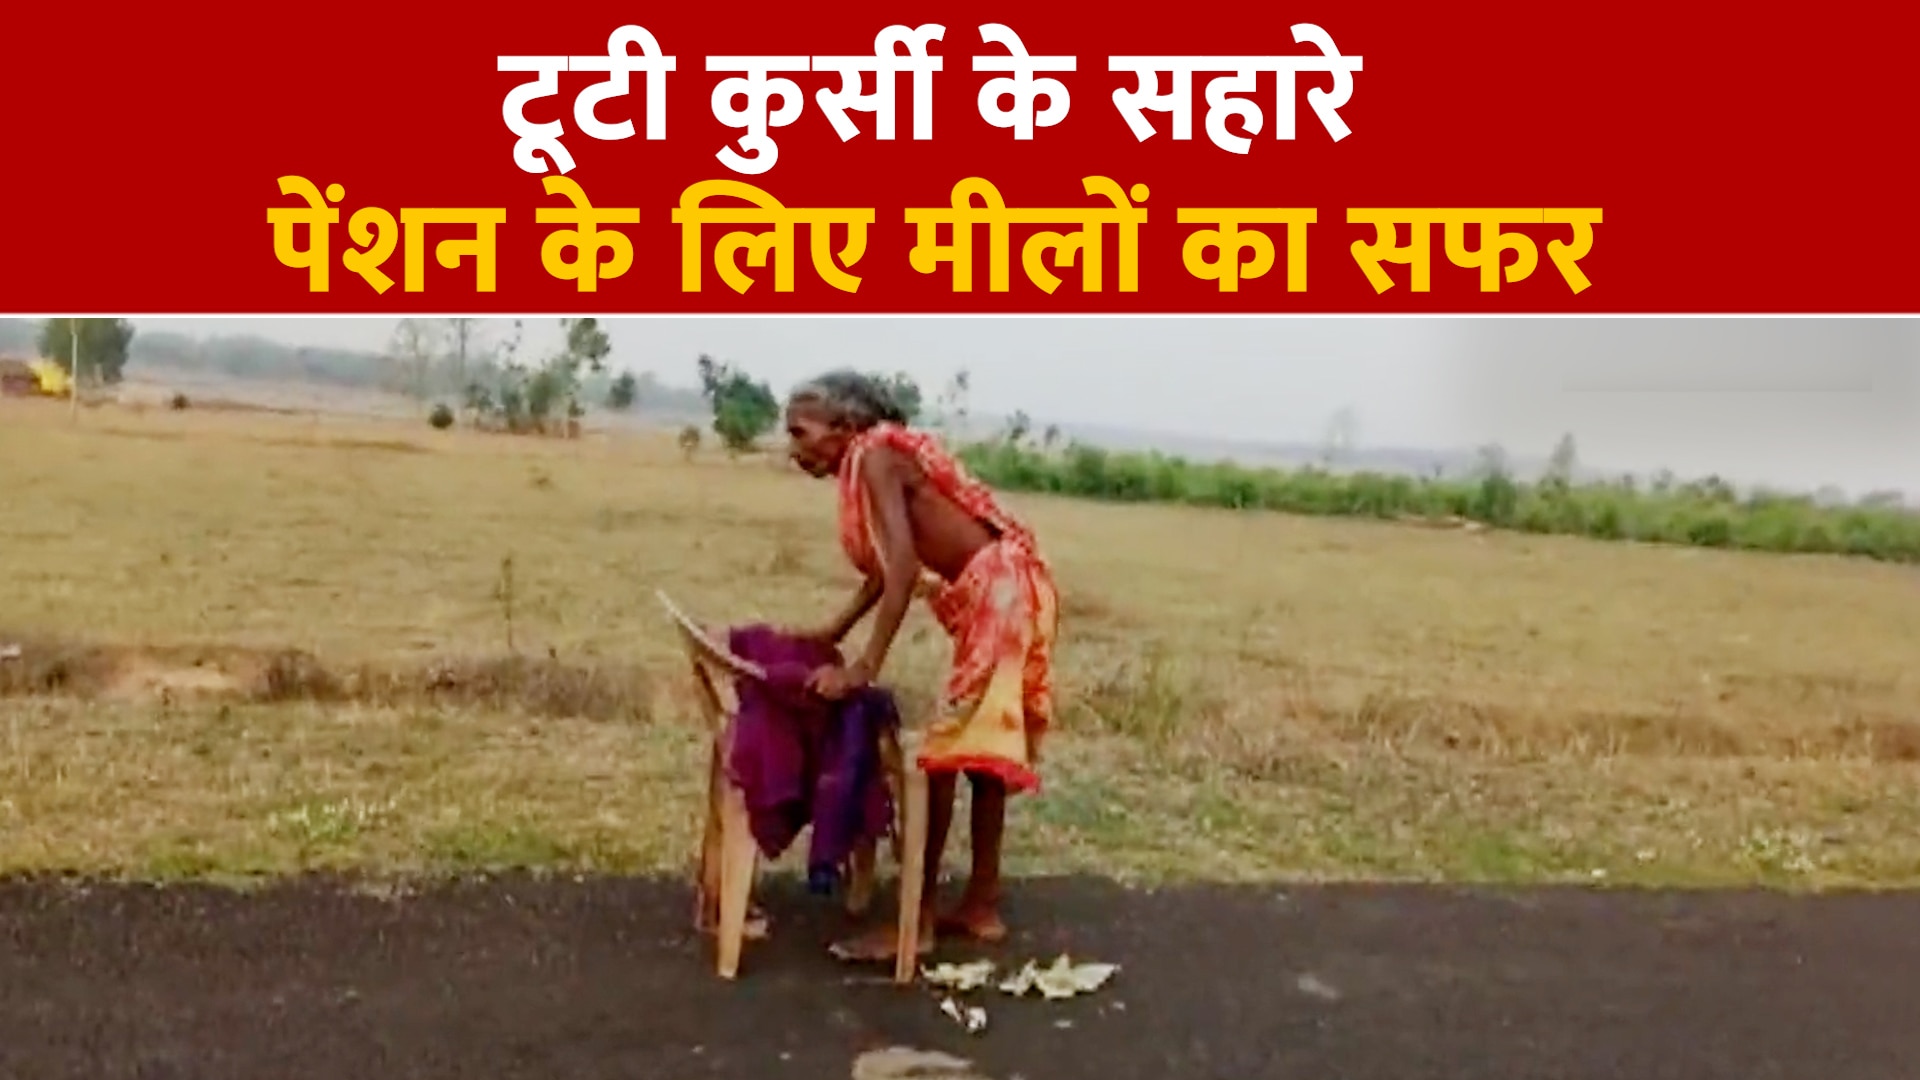 70 Year Old Woman Surya Harijan Walks Many Kilometers Barefoot To Collect Pension From Bank In 3220